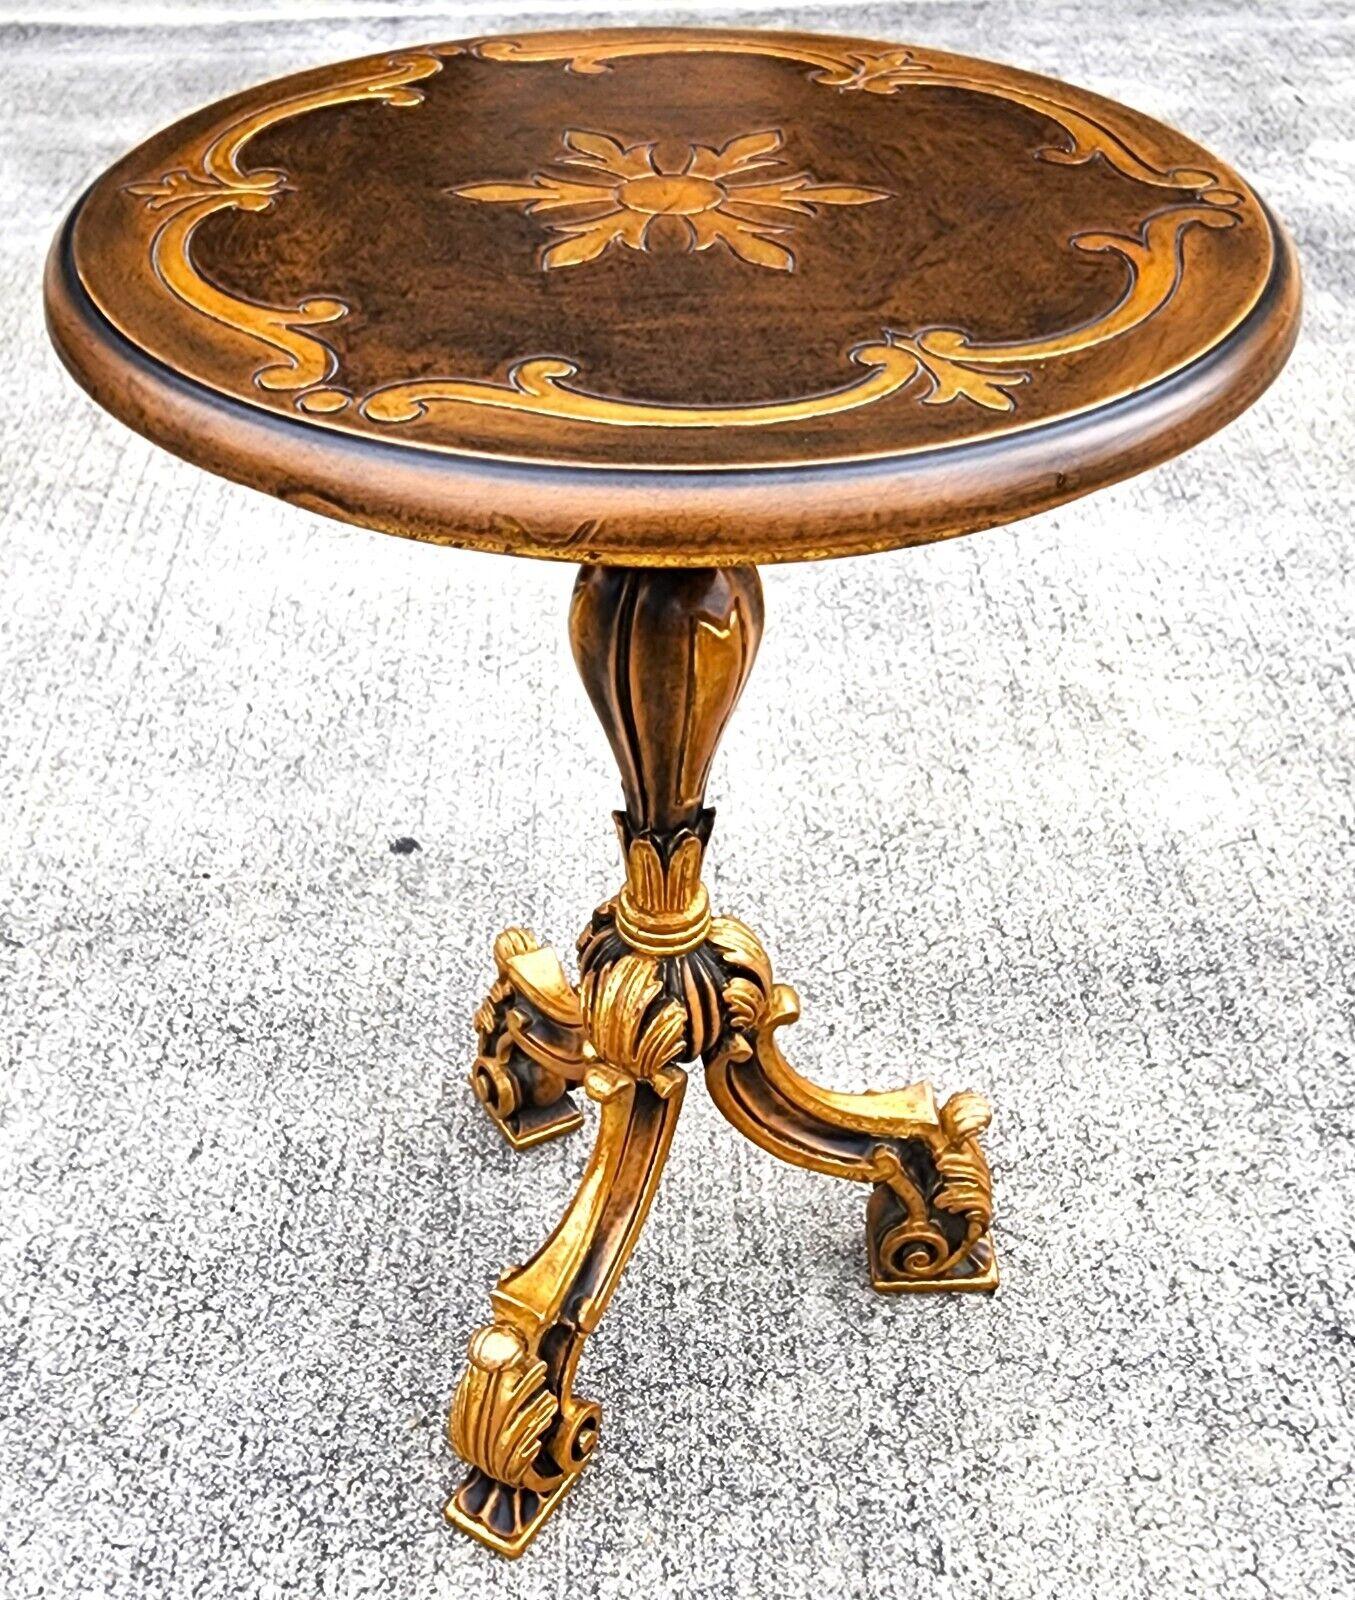 For FULL item description click on CONTINUE READING at the bottom of this page.

Offering One Of Our Recent Palm Beach Estate Fine Furniture Acquisitions Of A 
French Louis XIV Occasional Table by Decorative Crafts
This beautiful round wood table is